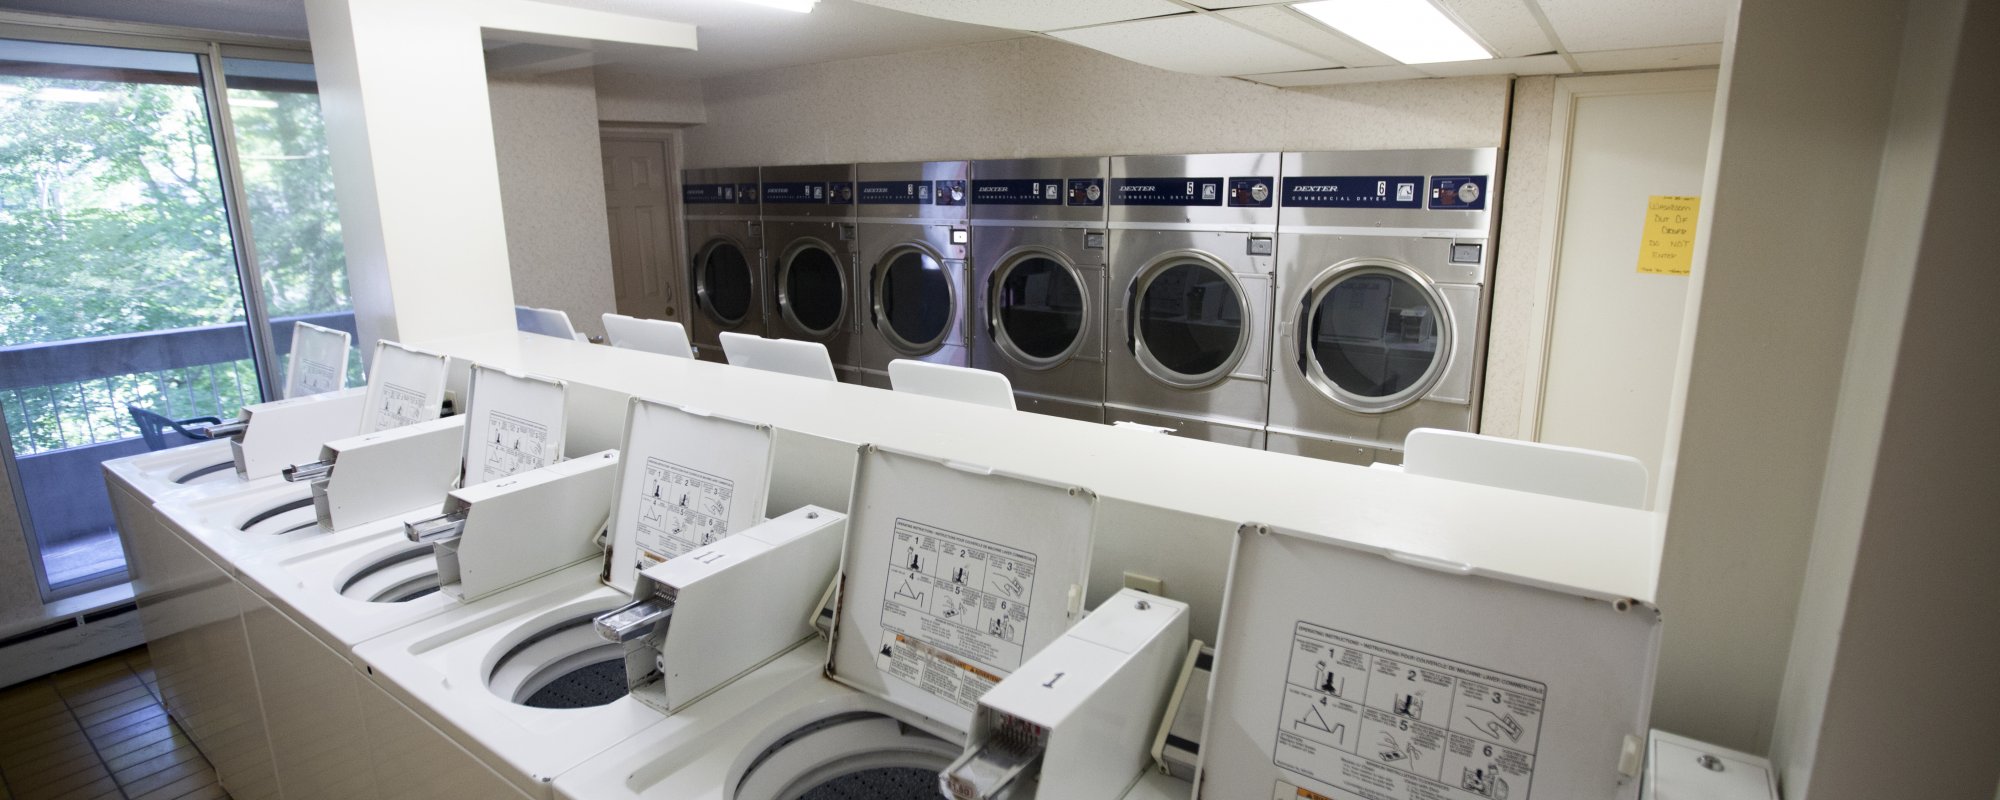 Laundry facilities in 700 Horizon, an apartment building in London, Ontario